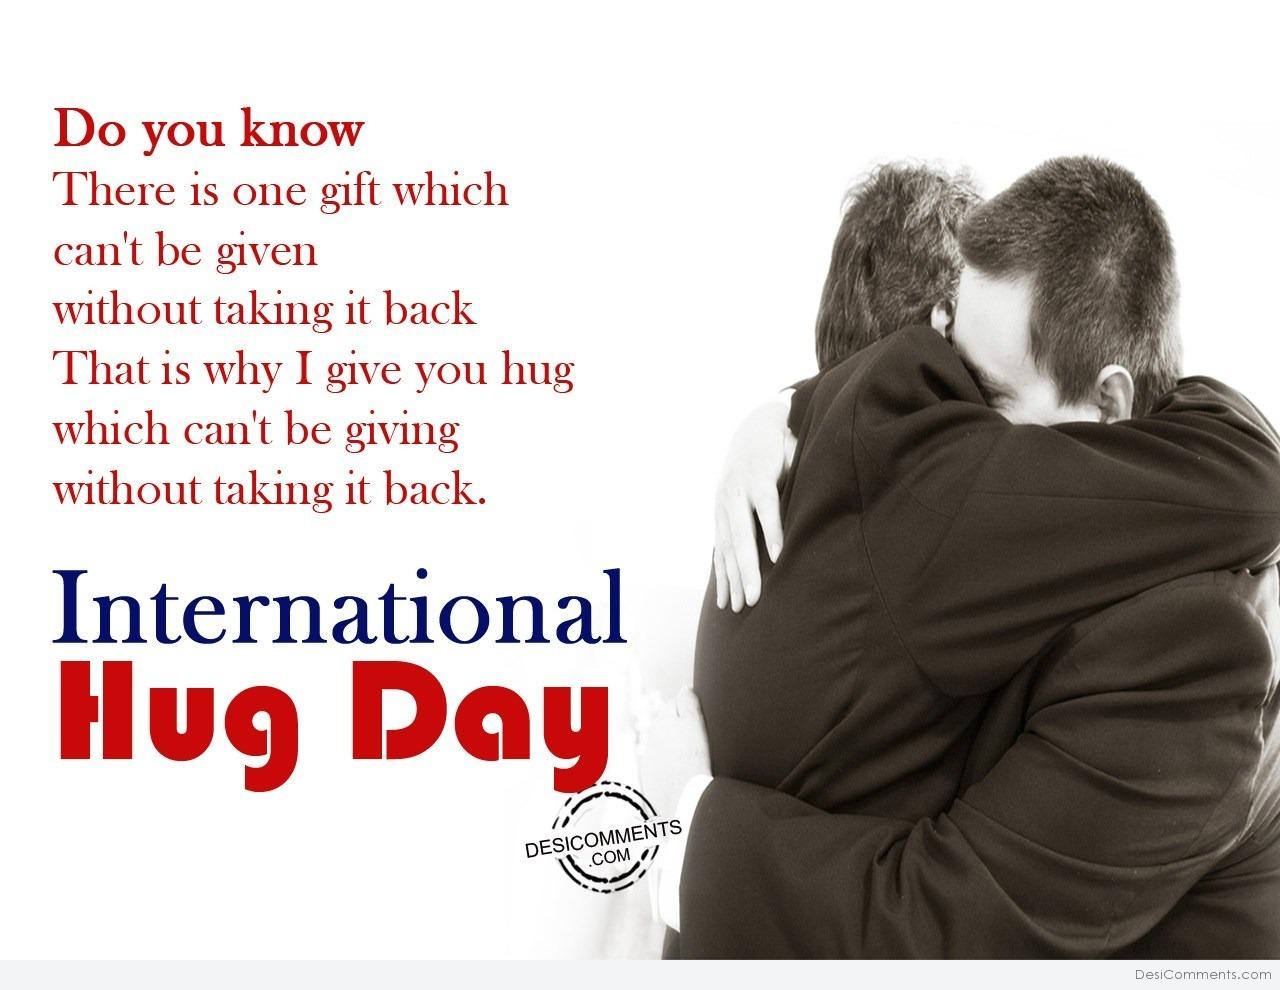 There is one gift,International Hug Day - DesiComments.com